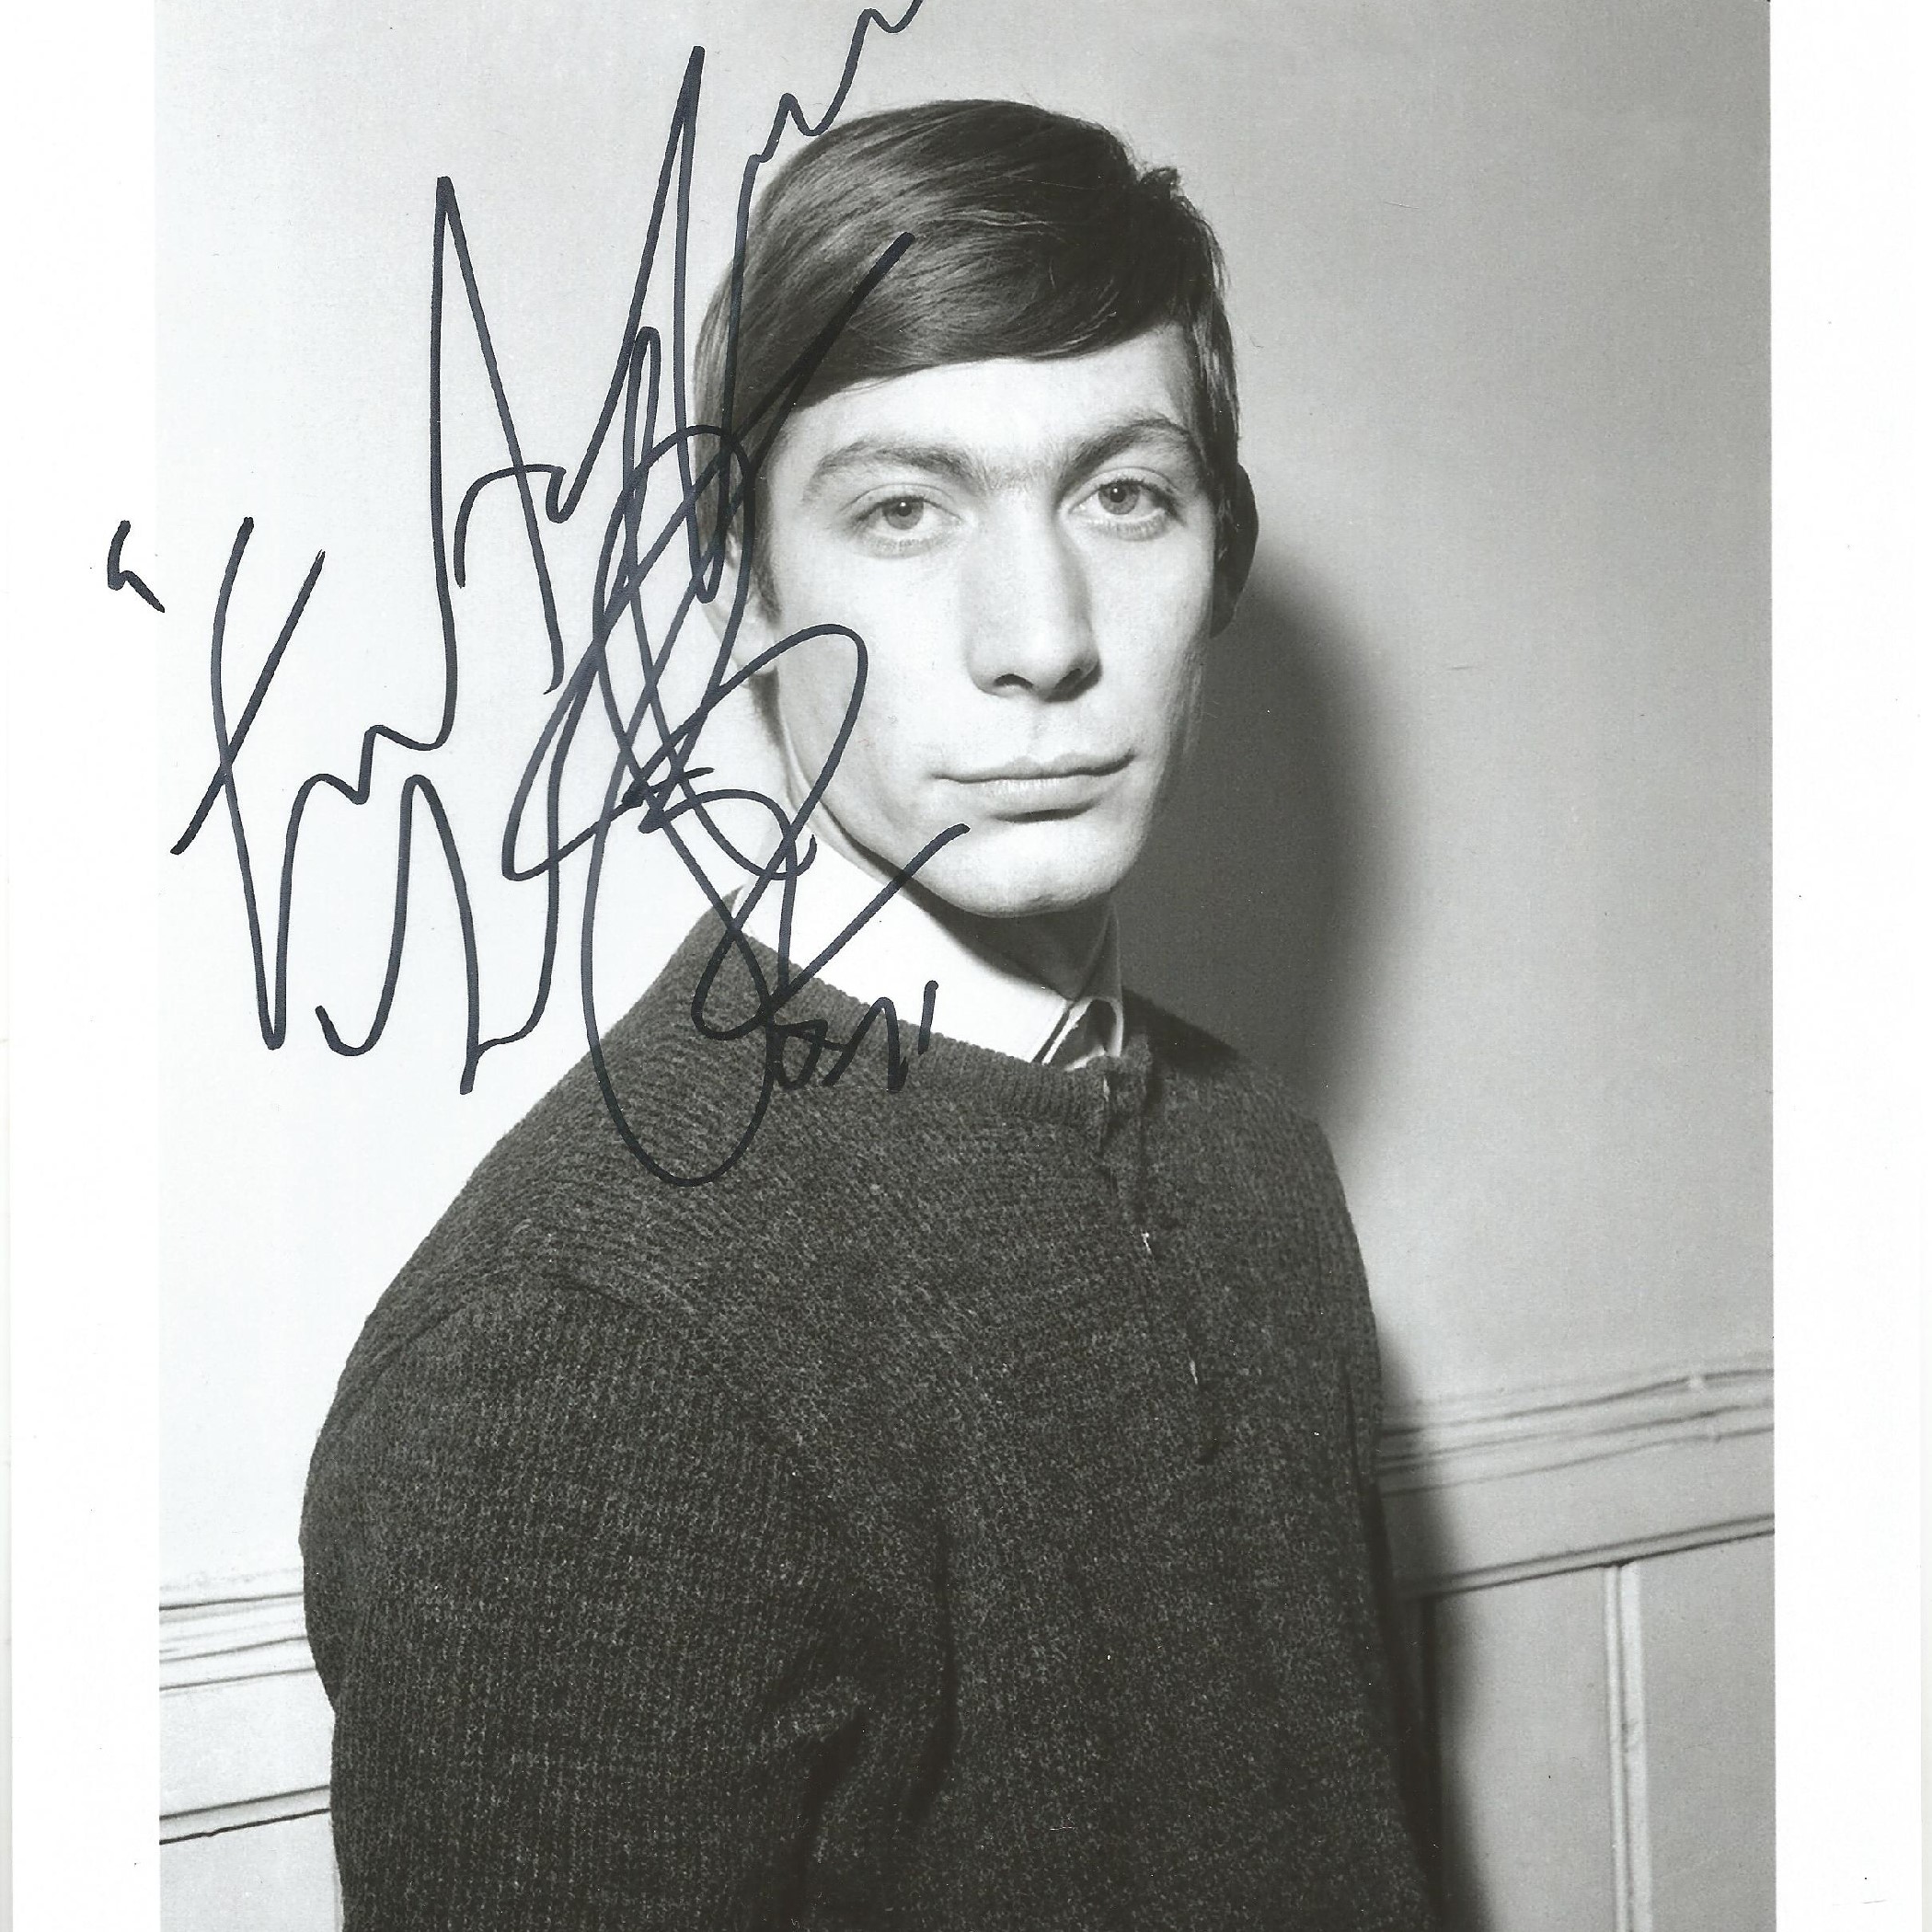 Charlie Watts signed 12x8 B/W photo. Charlie Watts is best known as the drummer for the Rolling